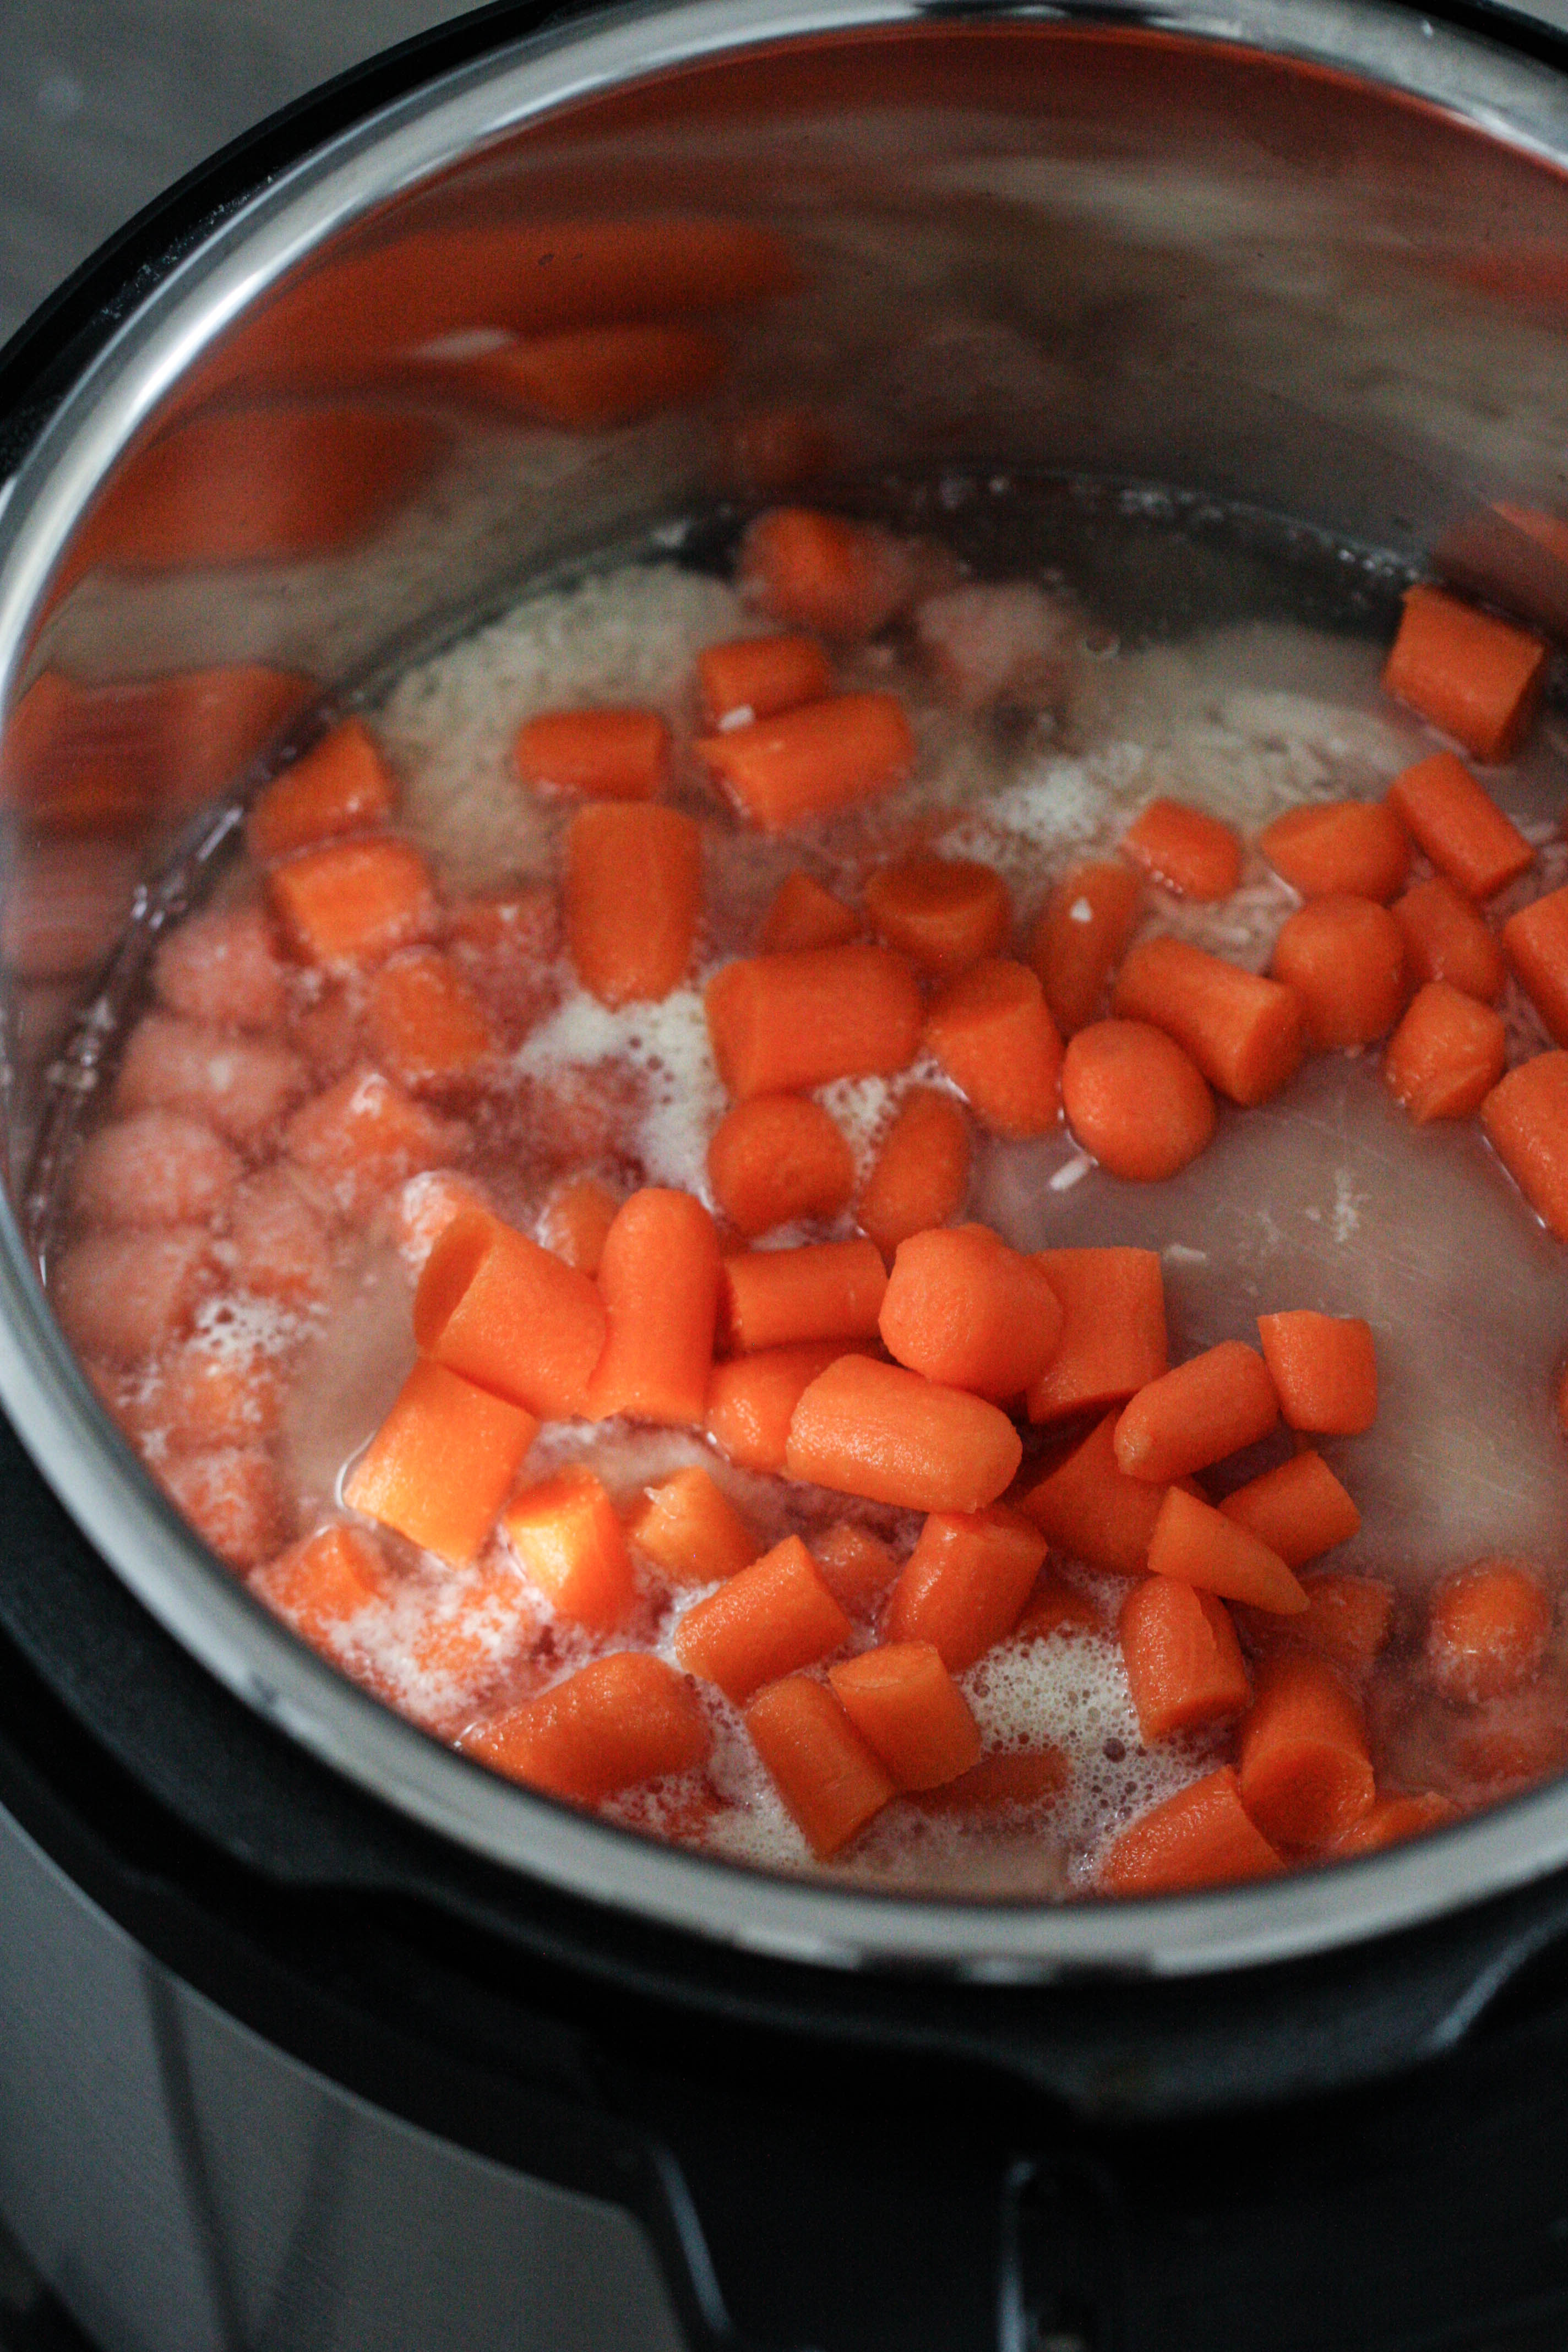 chicken and carrots in water in the inner portion of the instant pot